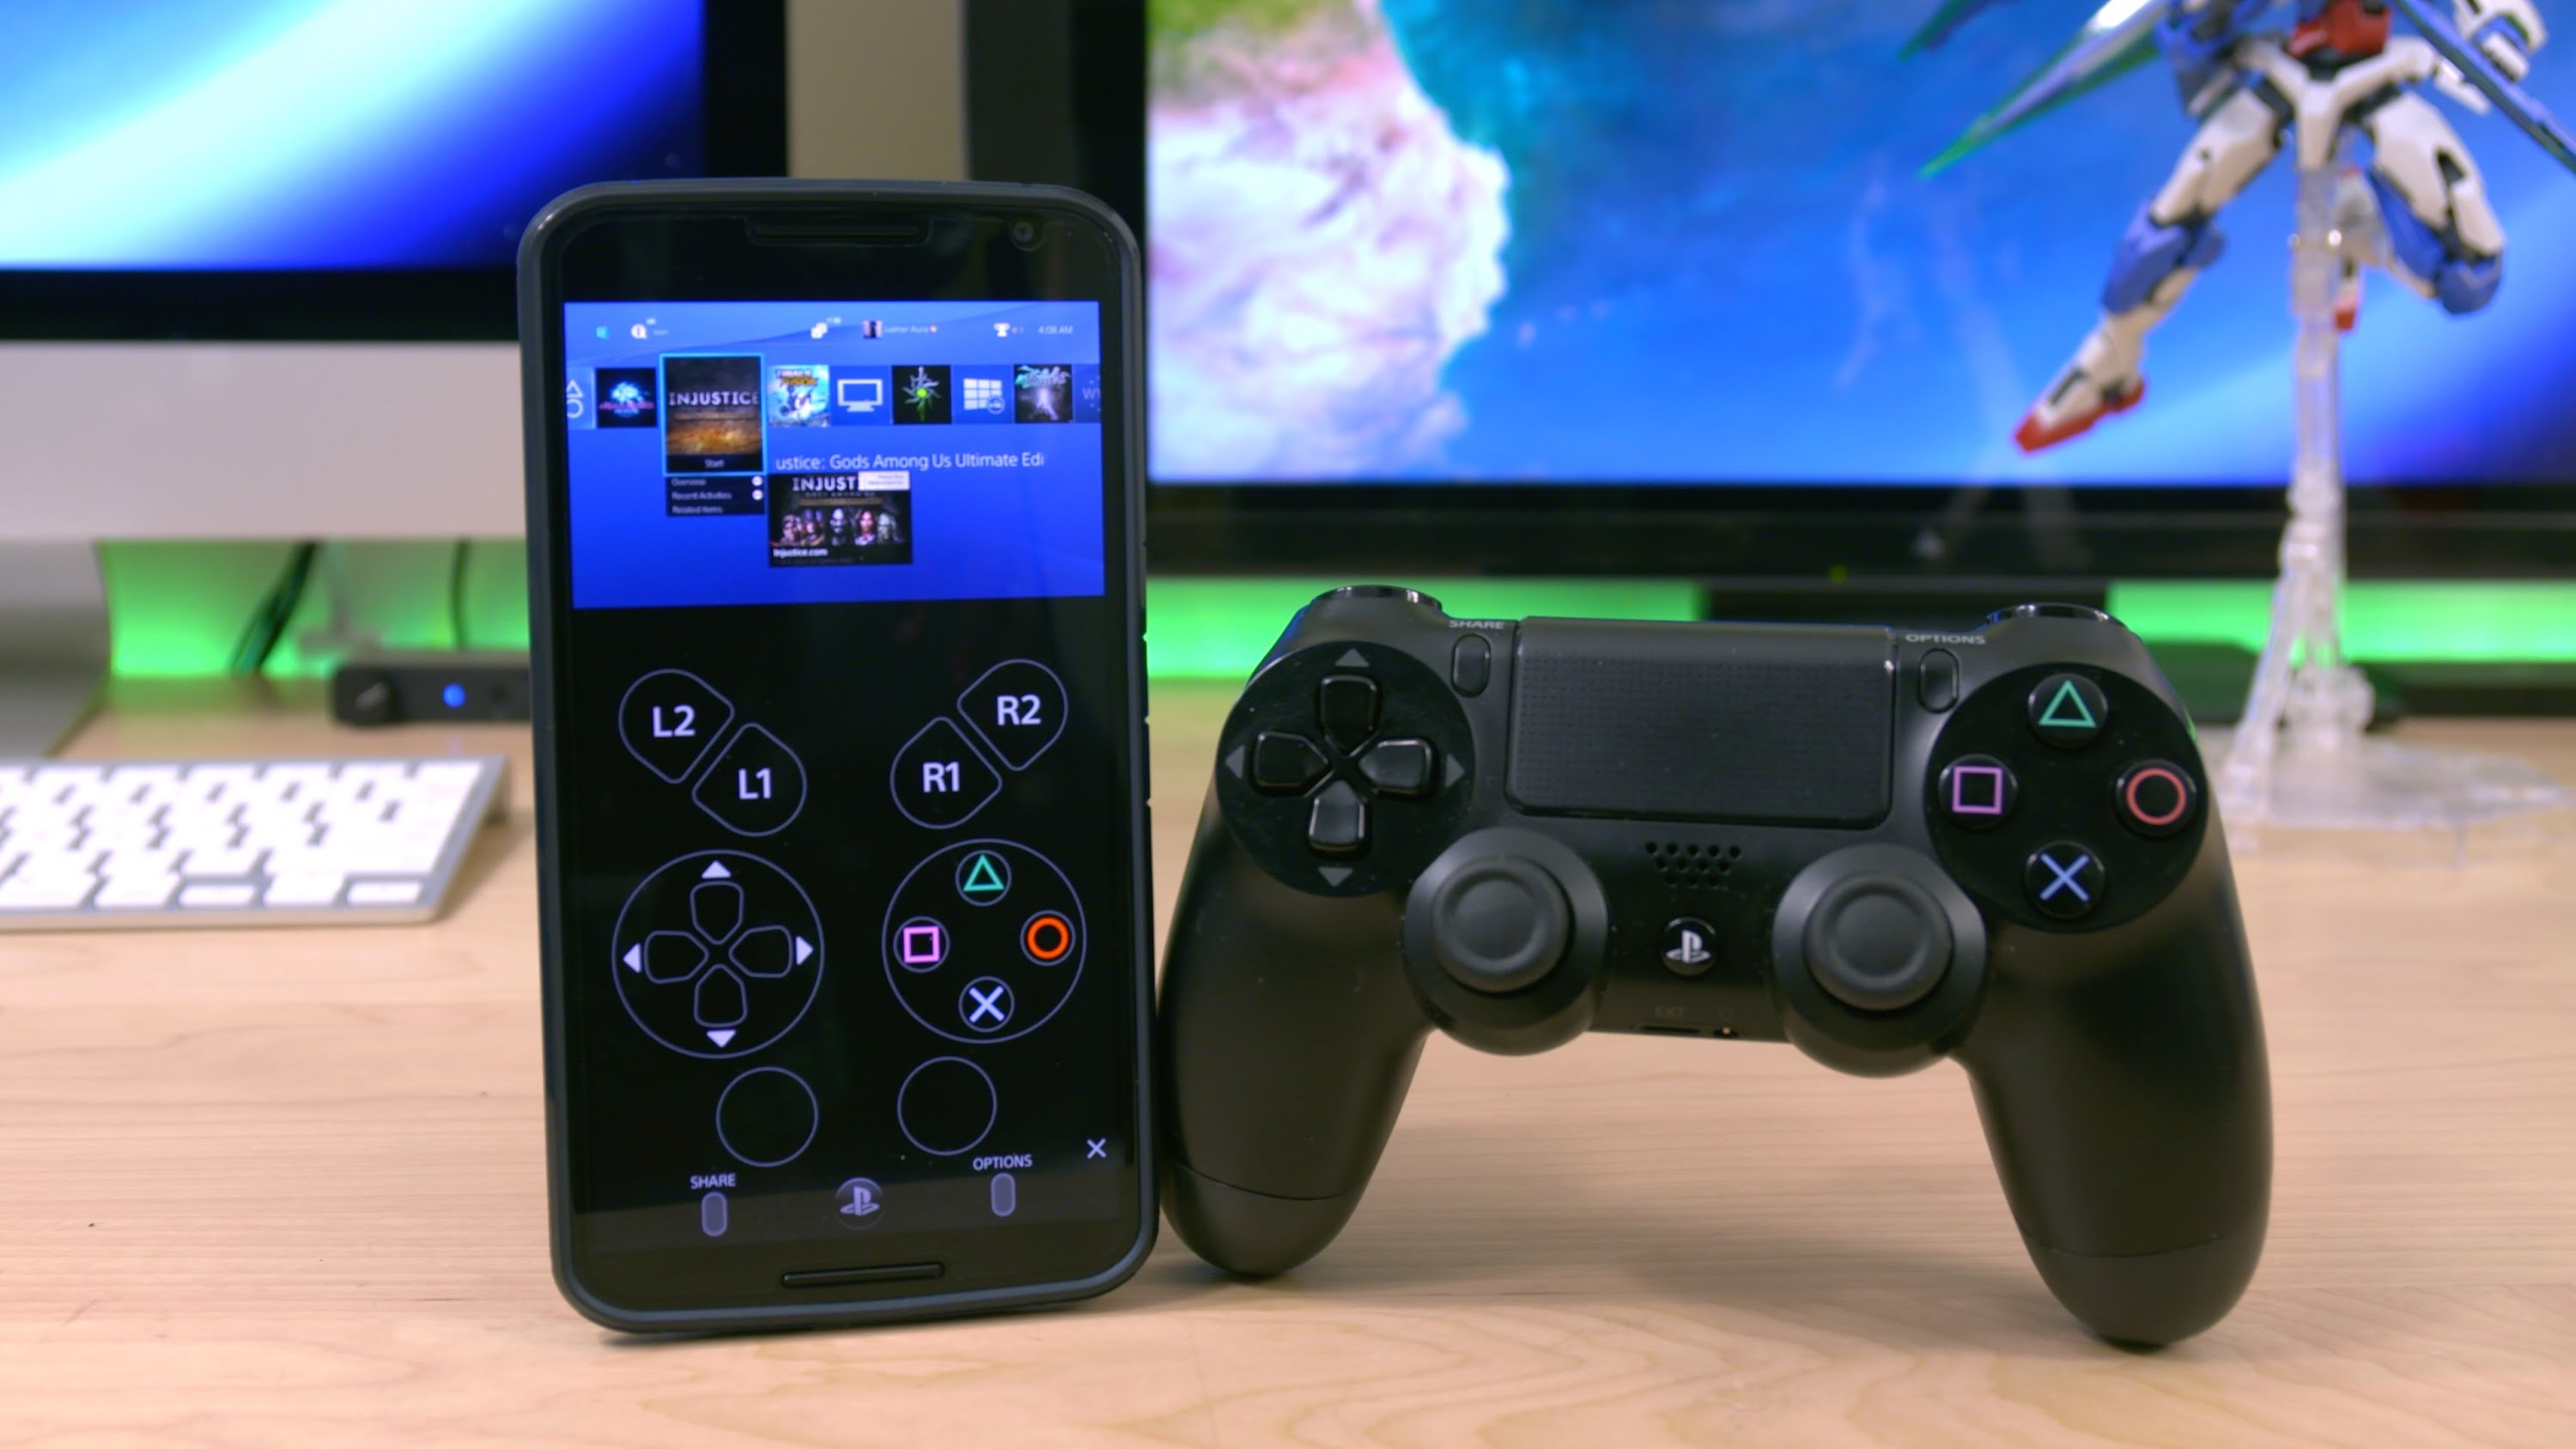 Ps5 portal remote. Sony ps5 Remote. Ps5 Remote Play Android TV. Ps4 Play. Ремоут плей пс5.